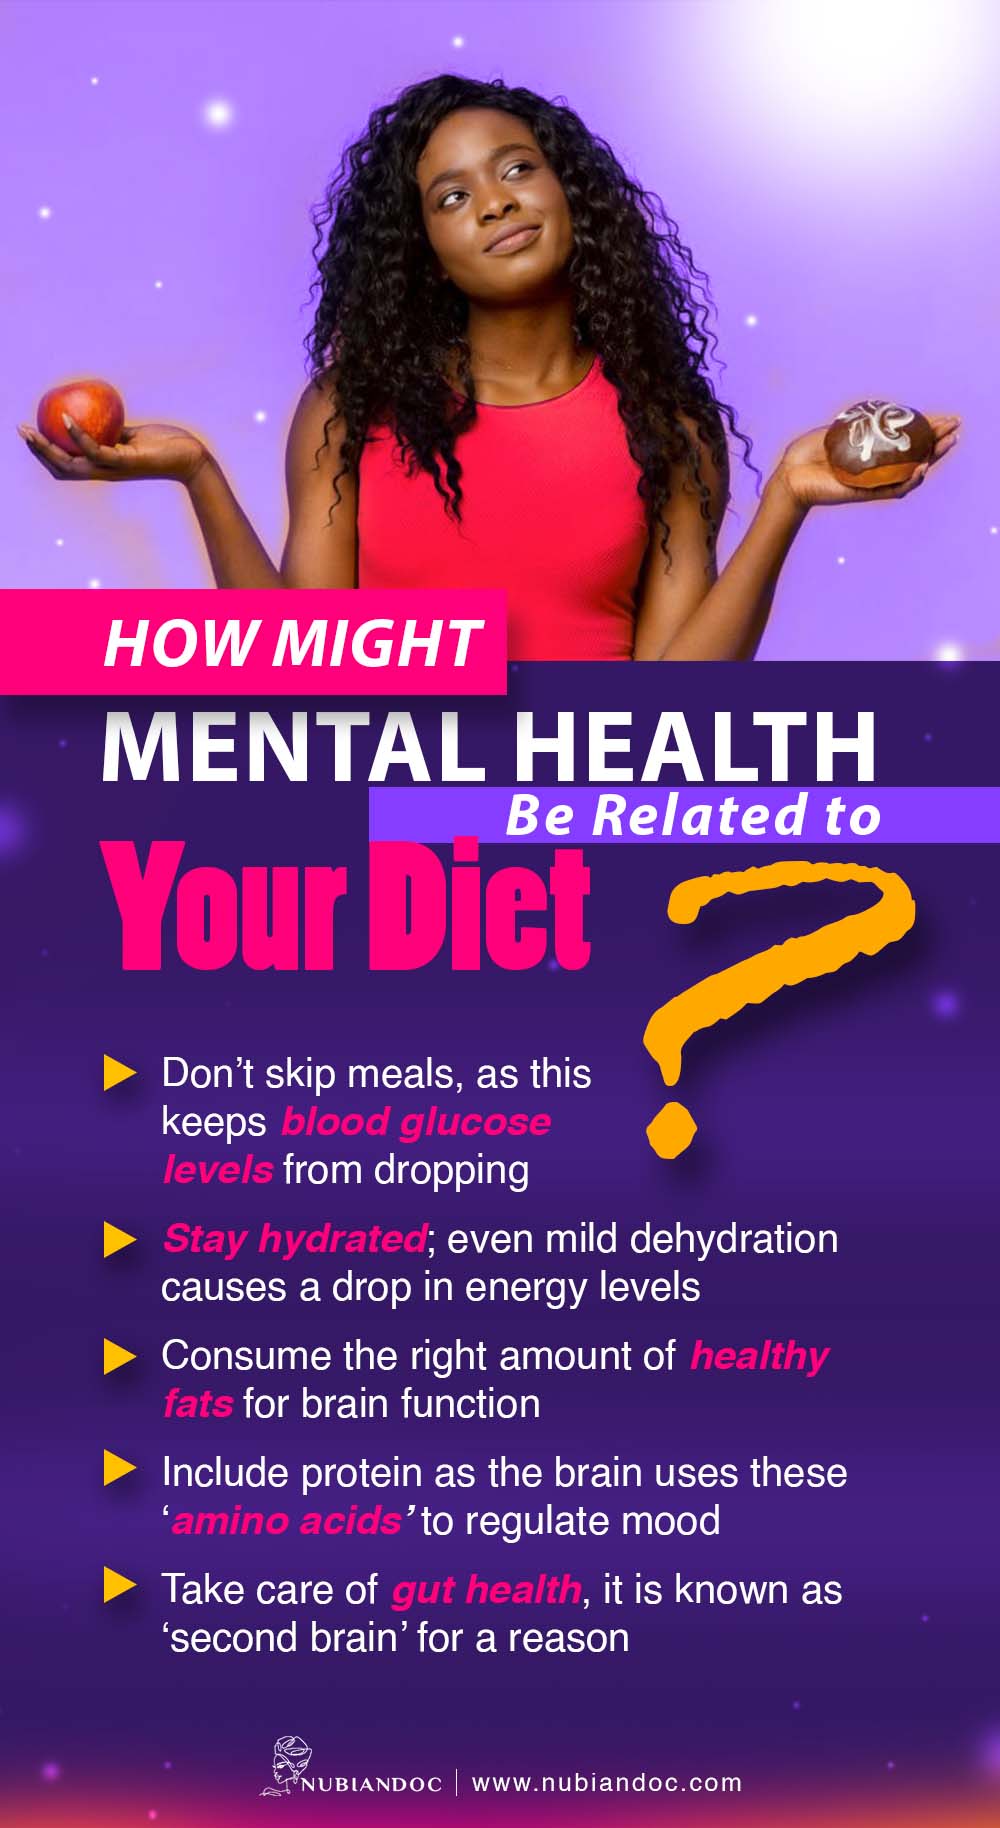 mental health issues related to your diet